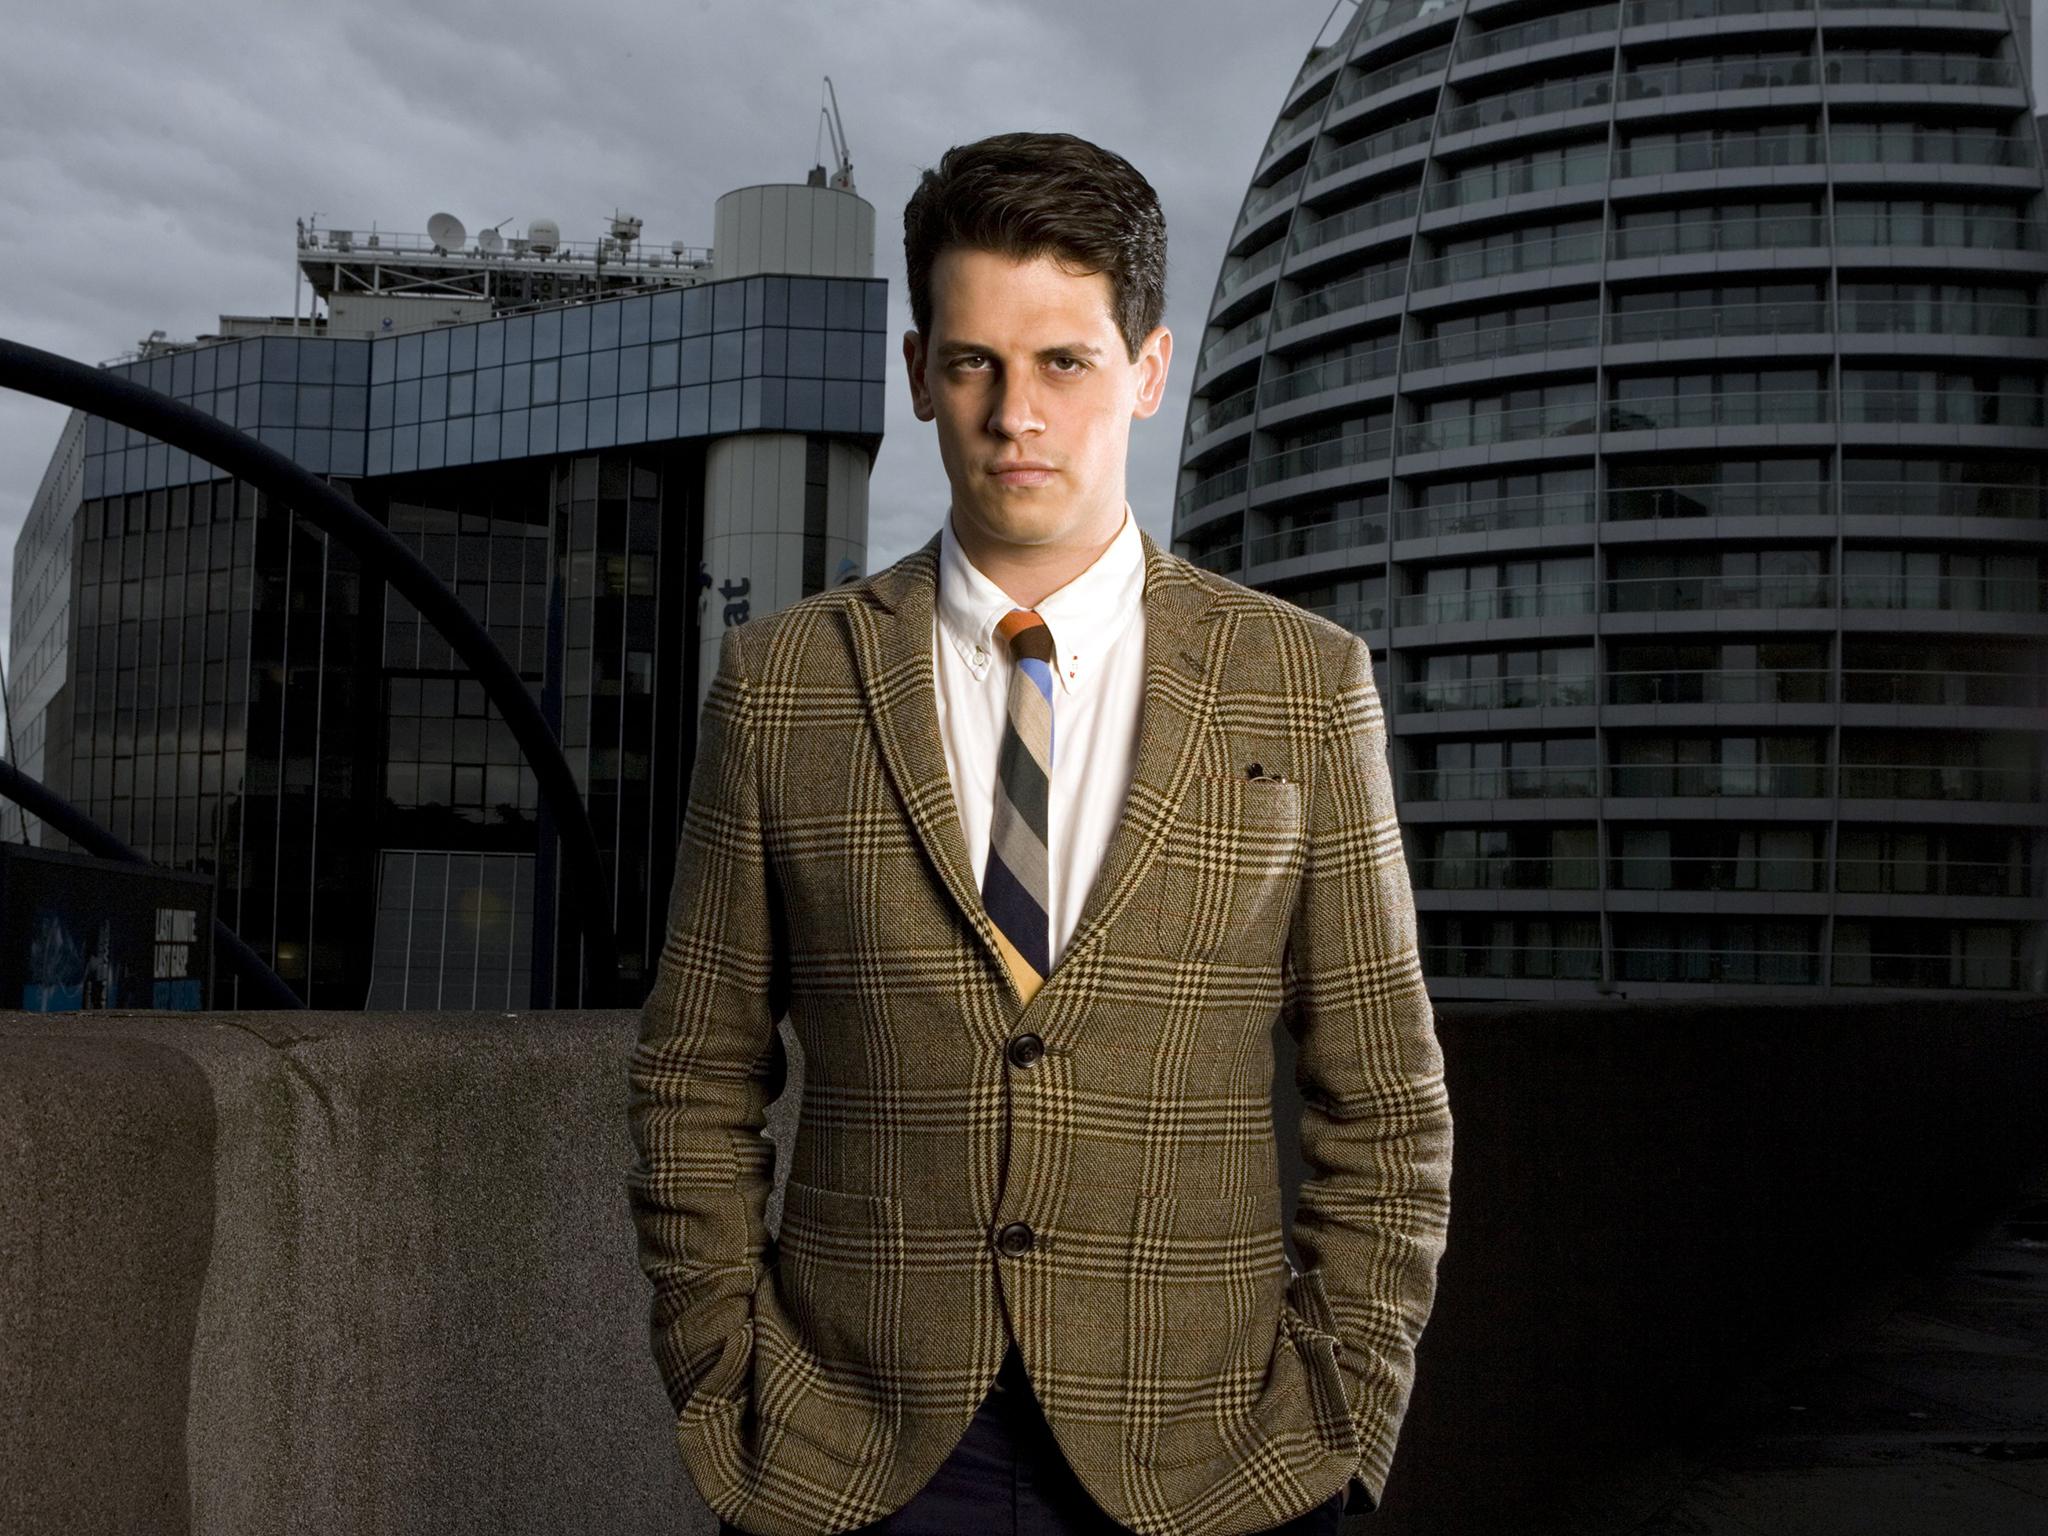 Mr Yiannopoulos also promised to visit the Scottish city a minimum of three times a year and hold events with students if he is successful